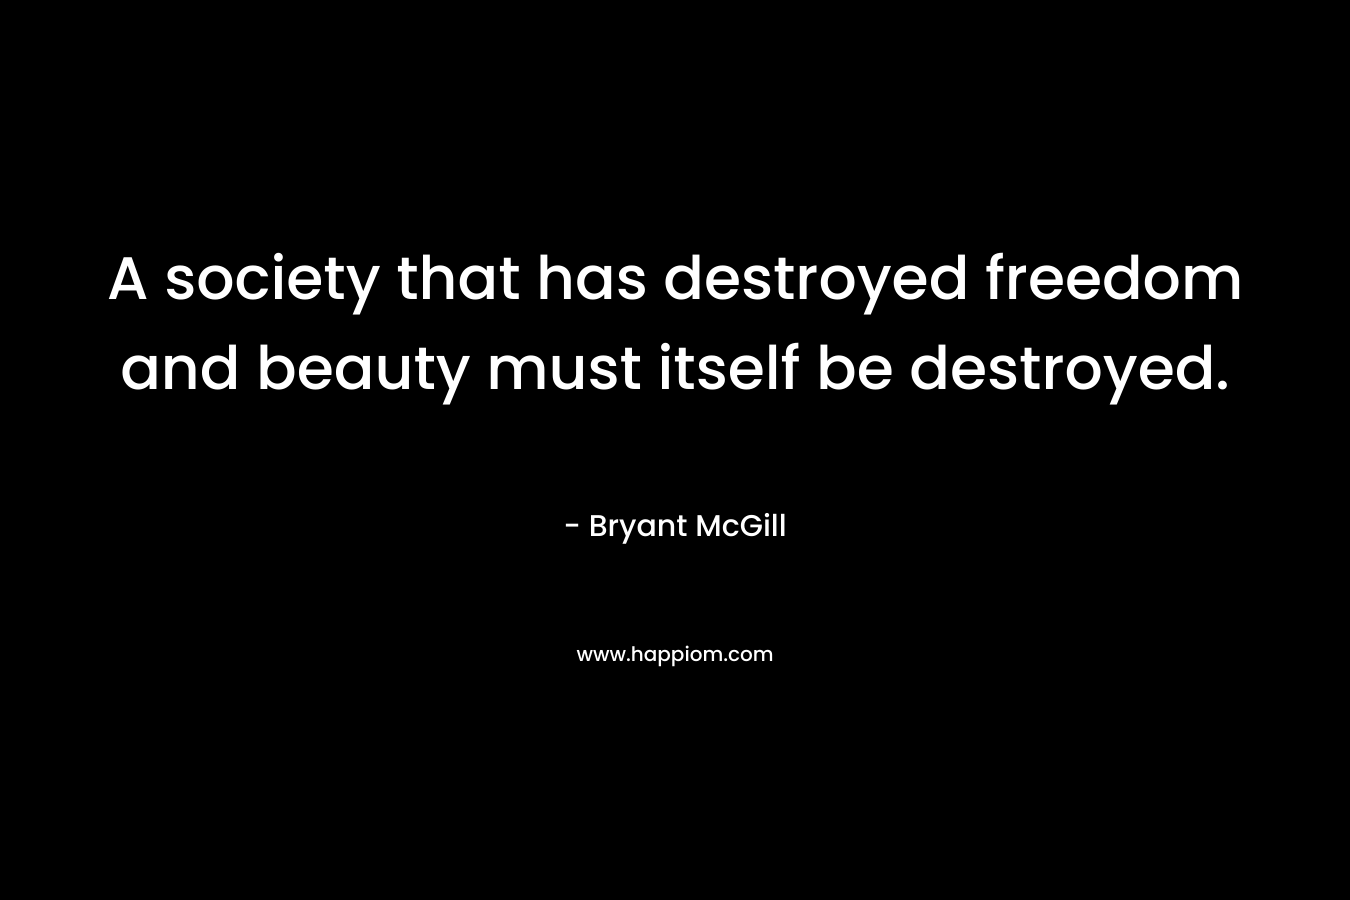 A society that has destroyed freedom and beauty must itself be destroyed.